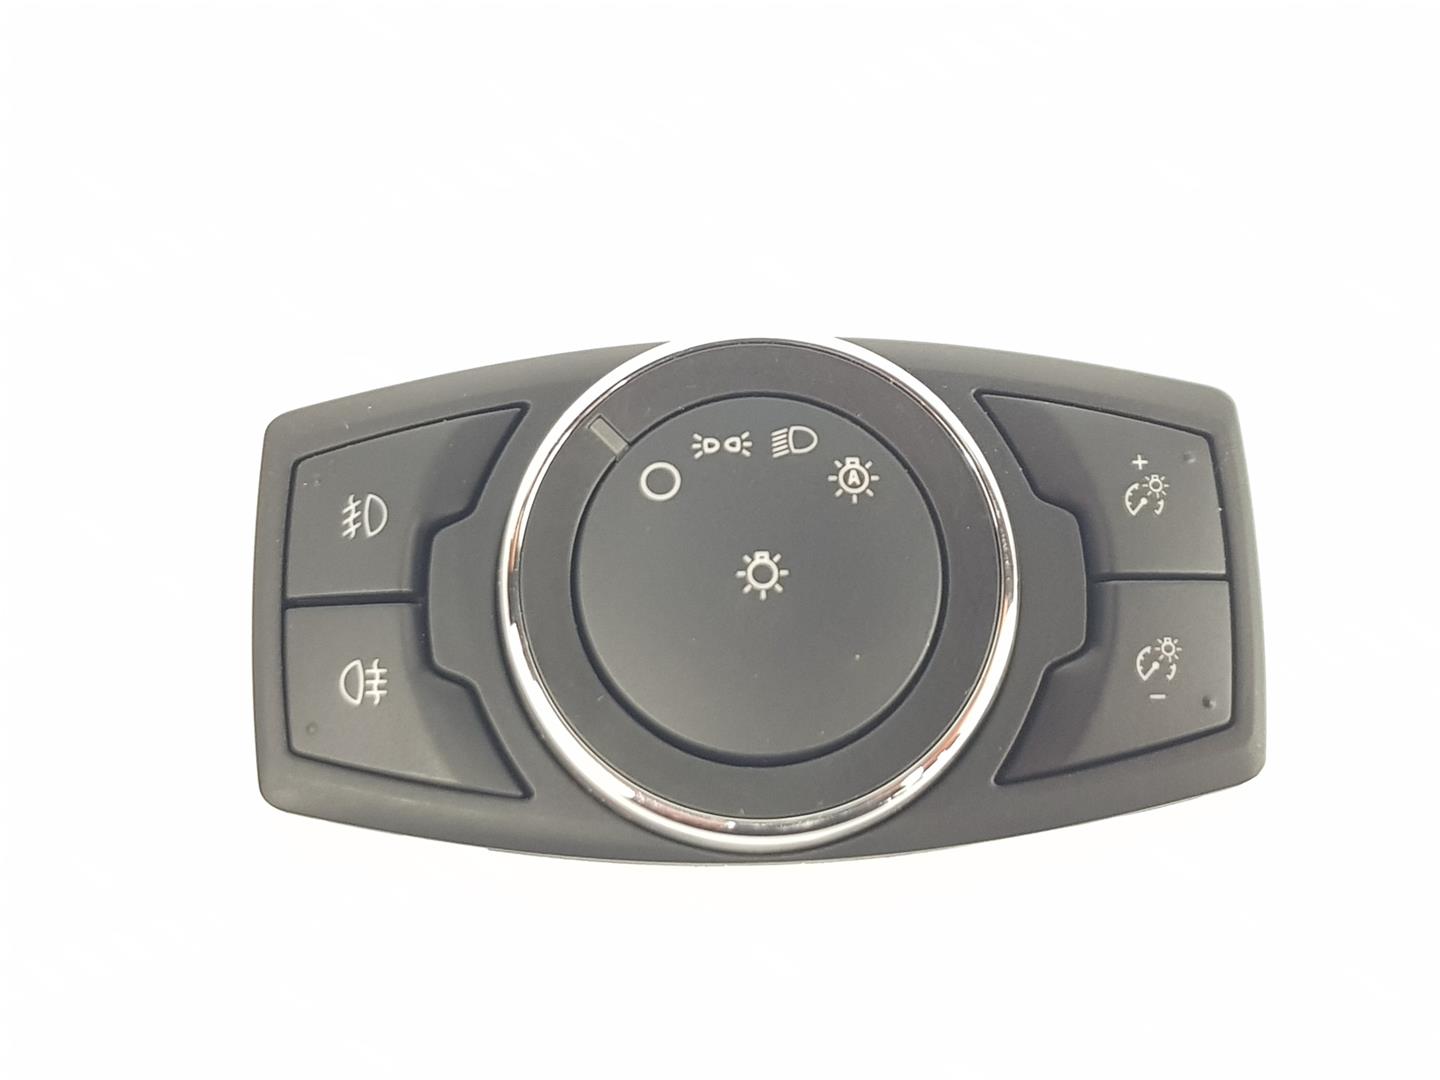 FORD USA Mustang 5 generation (2004-2014) Headlight Switch Control Unit 2498830, DG9T13D061FFW, 1141CB2222DL 24142154